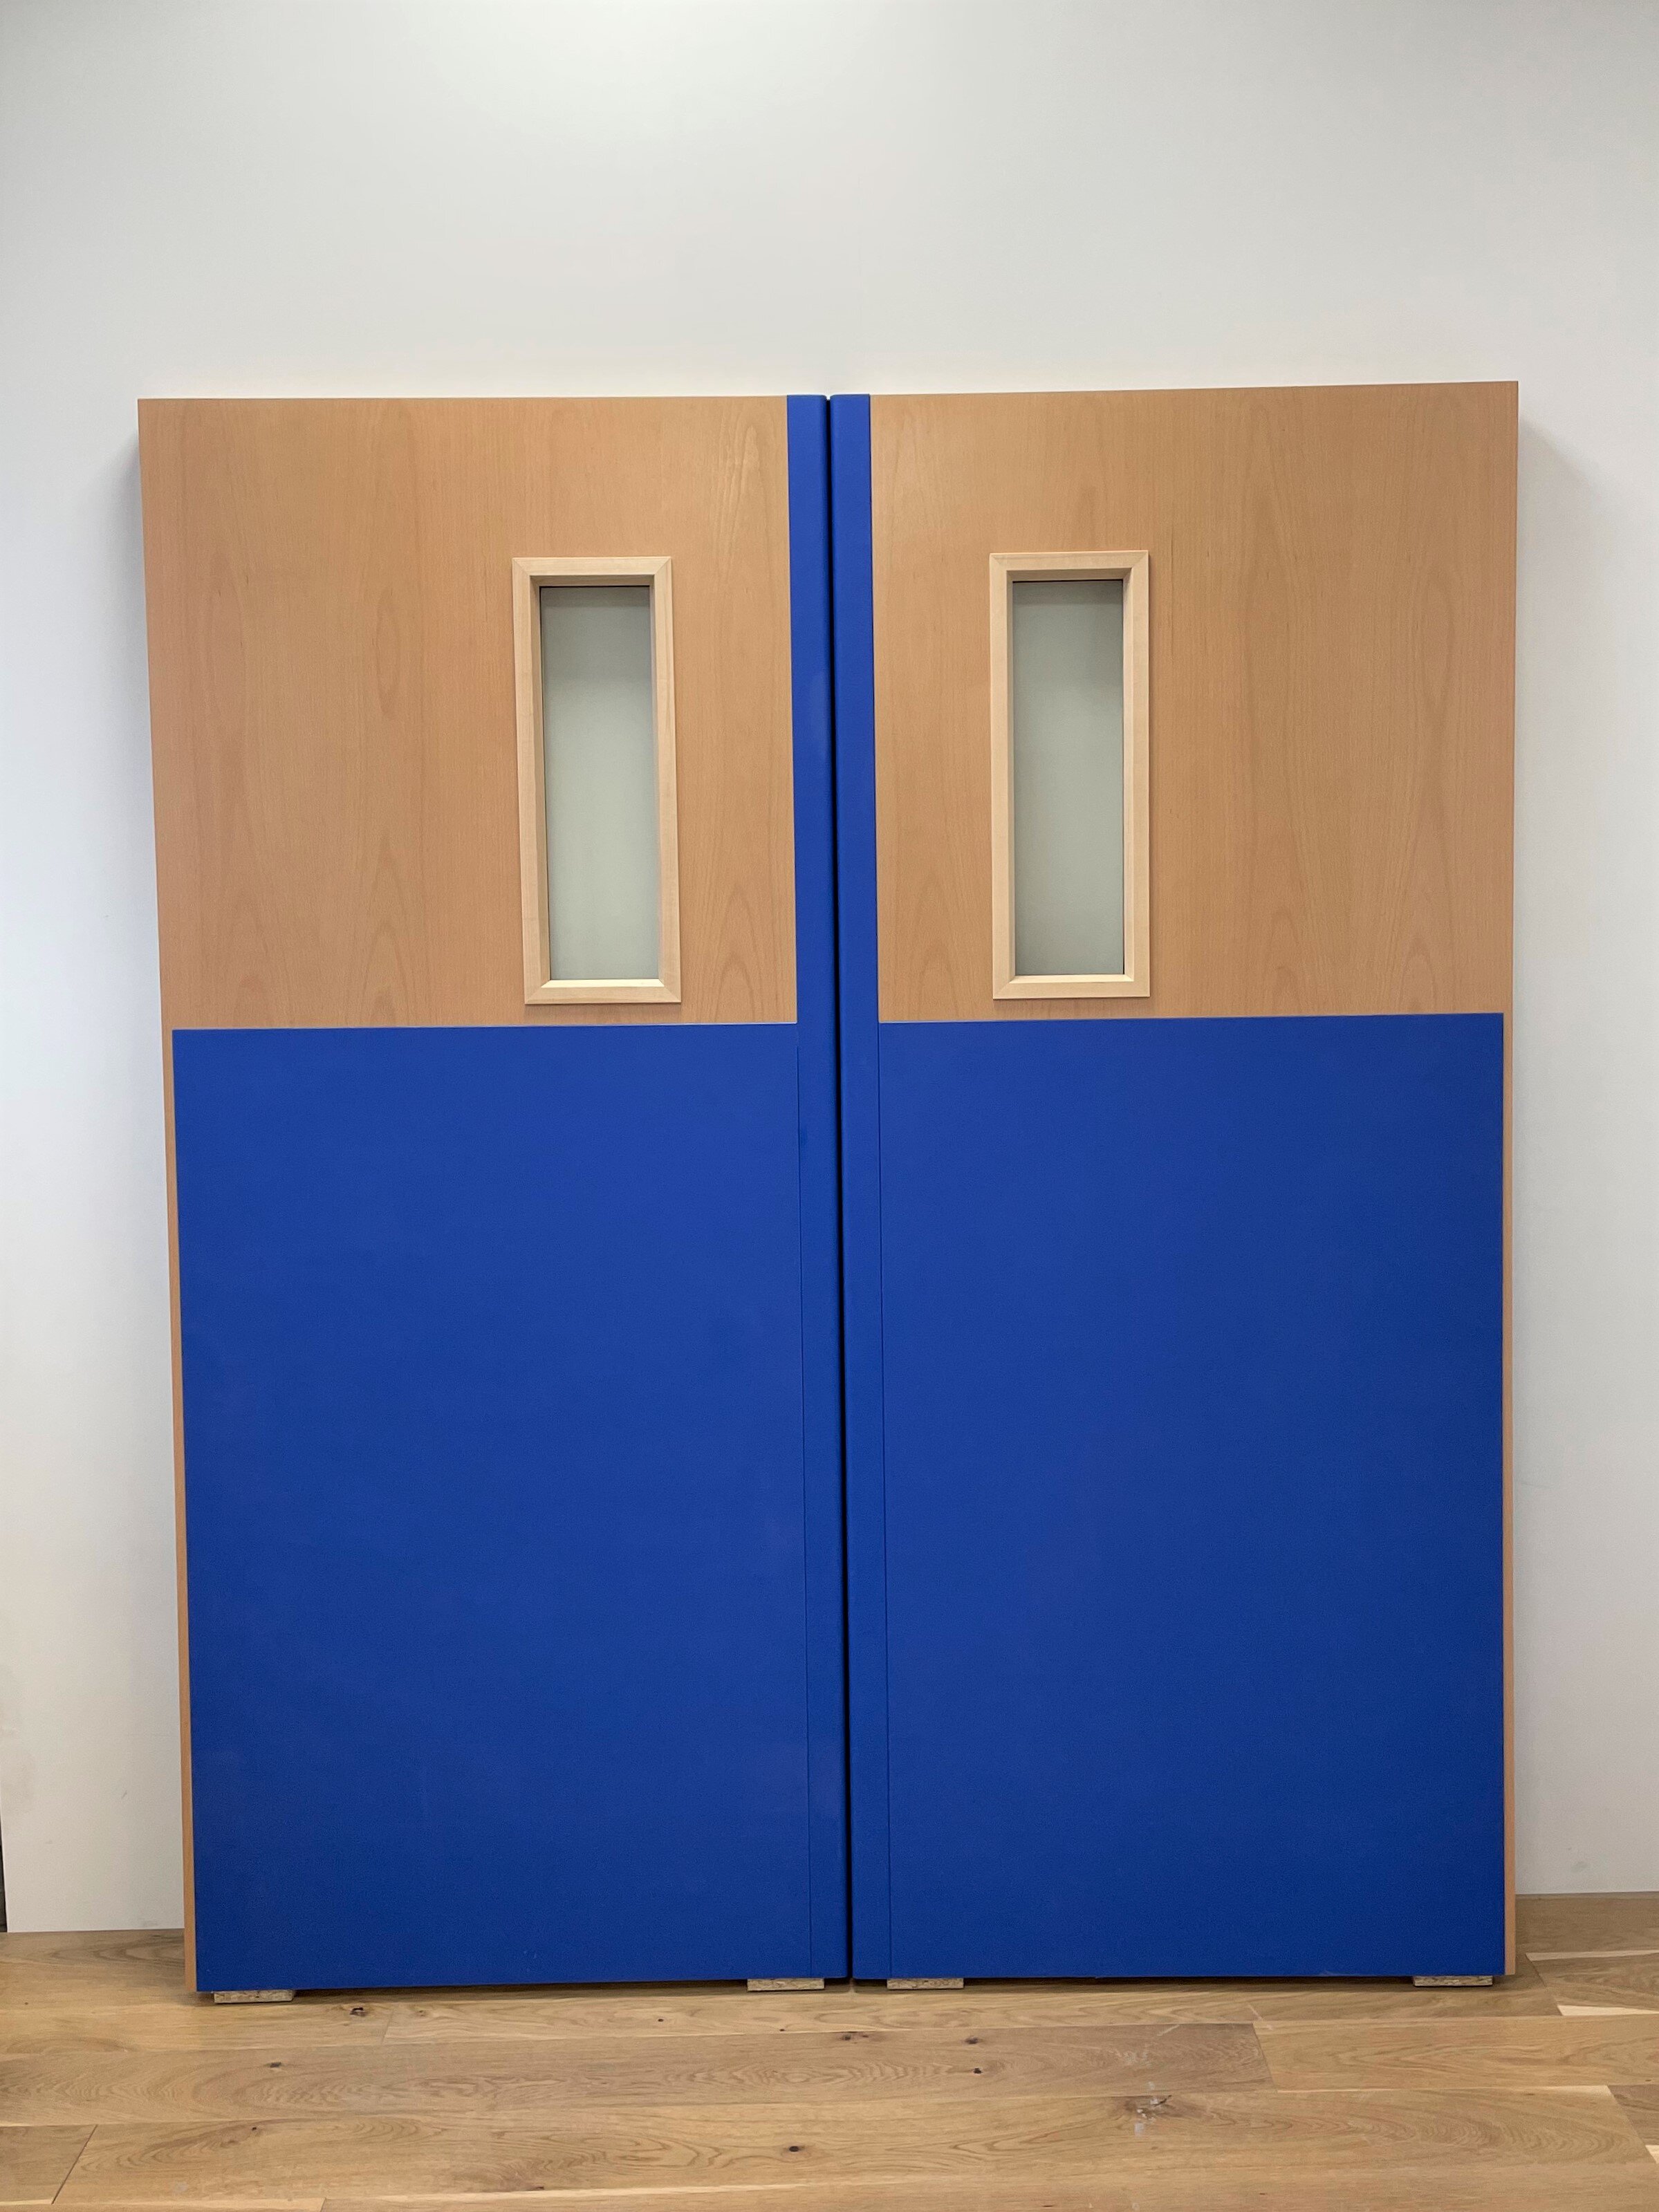 Pair of FD60 doors equipped with Yeoman protection panels and edge protection for the Birmingham Children's Hospital 